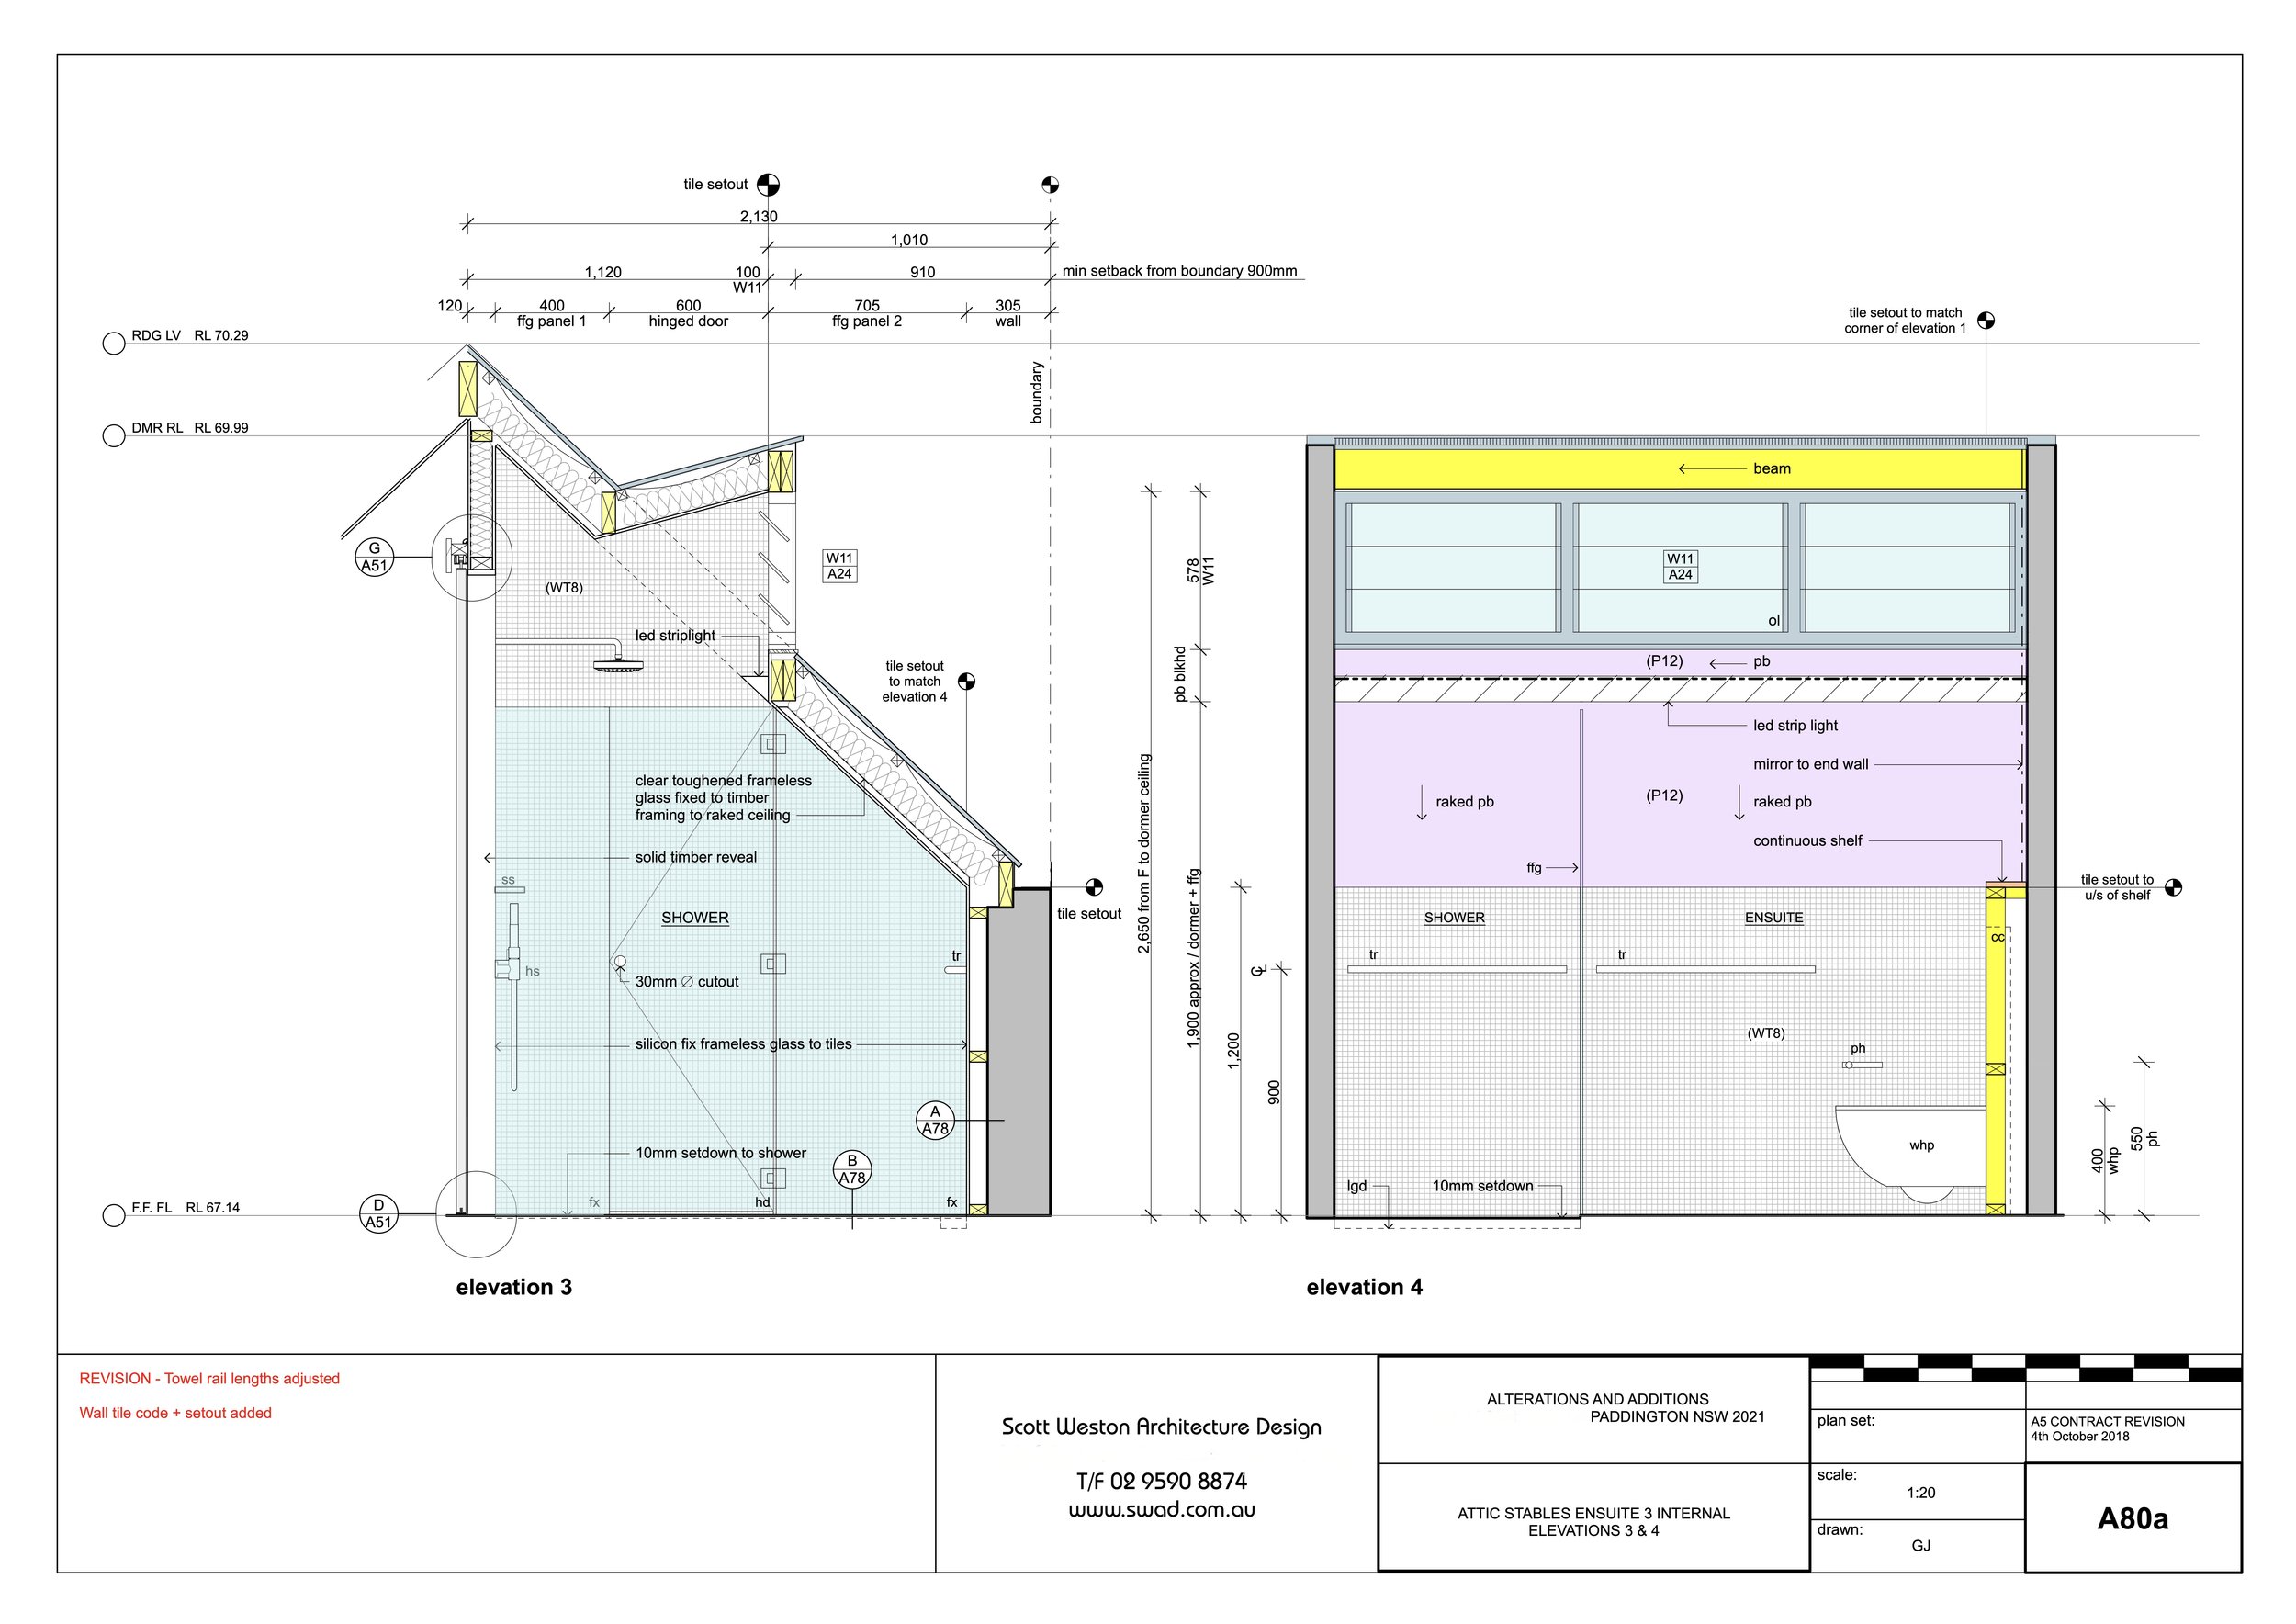 A80a ATTIC STABLES ENSUITE 3 INTERNAL ELEVATIONS 3 & 4 2.jpg